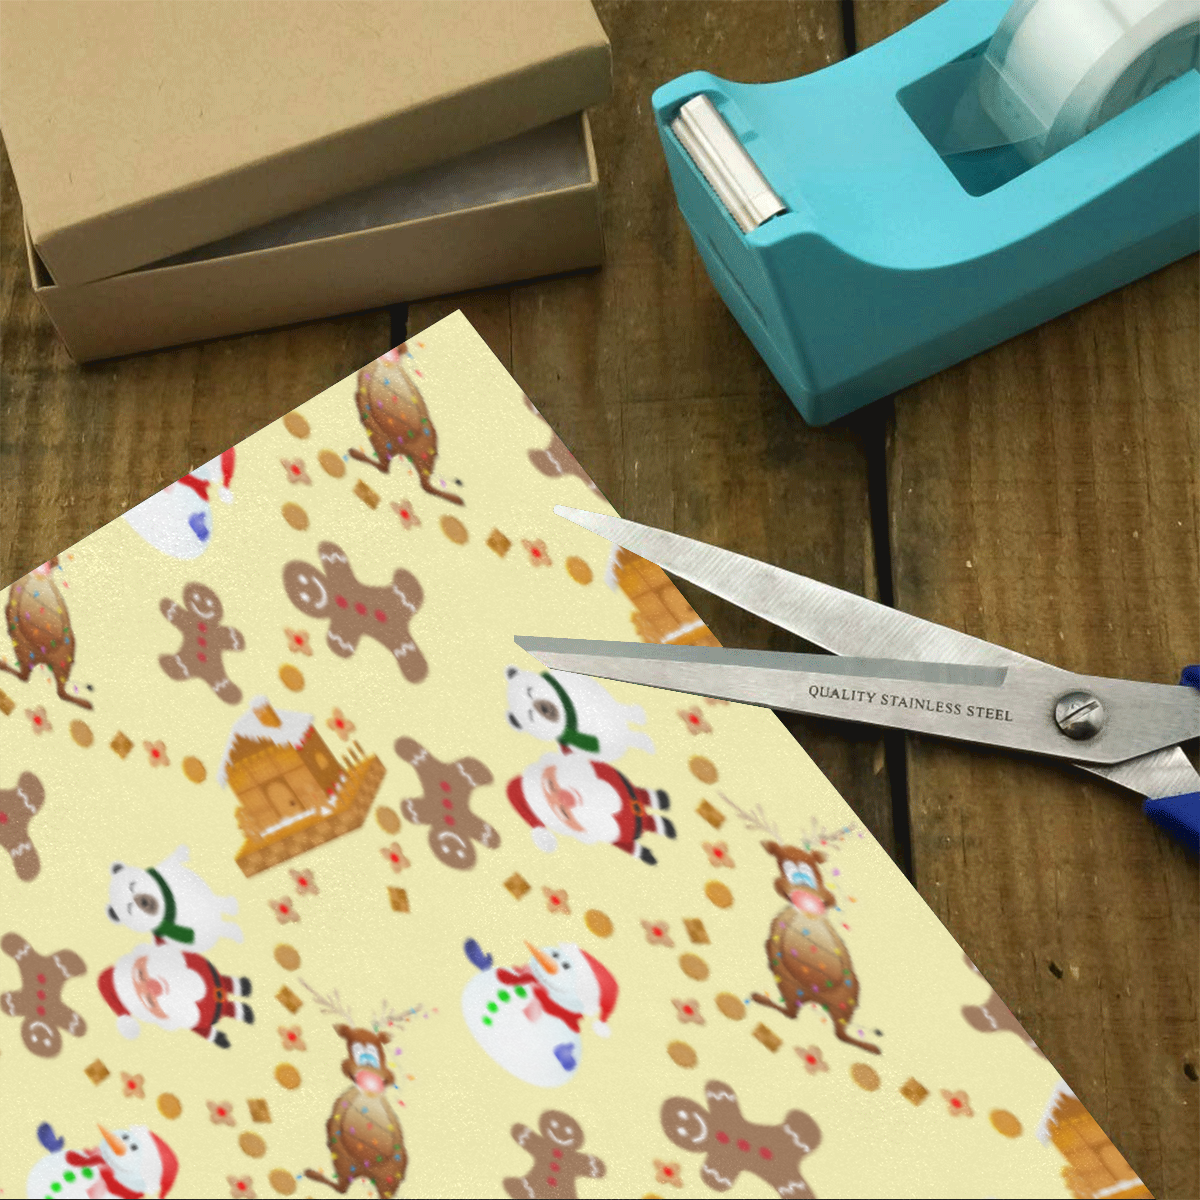 Christmas Gingerbread Snowman and Santa Claus Yellow Gift Wrapping Paper 58"x 23" (3 Rolls)